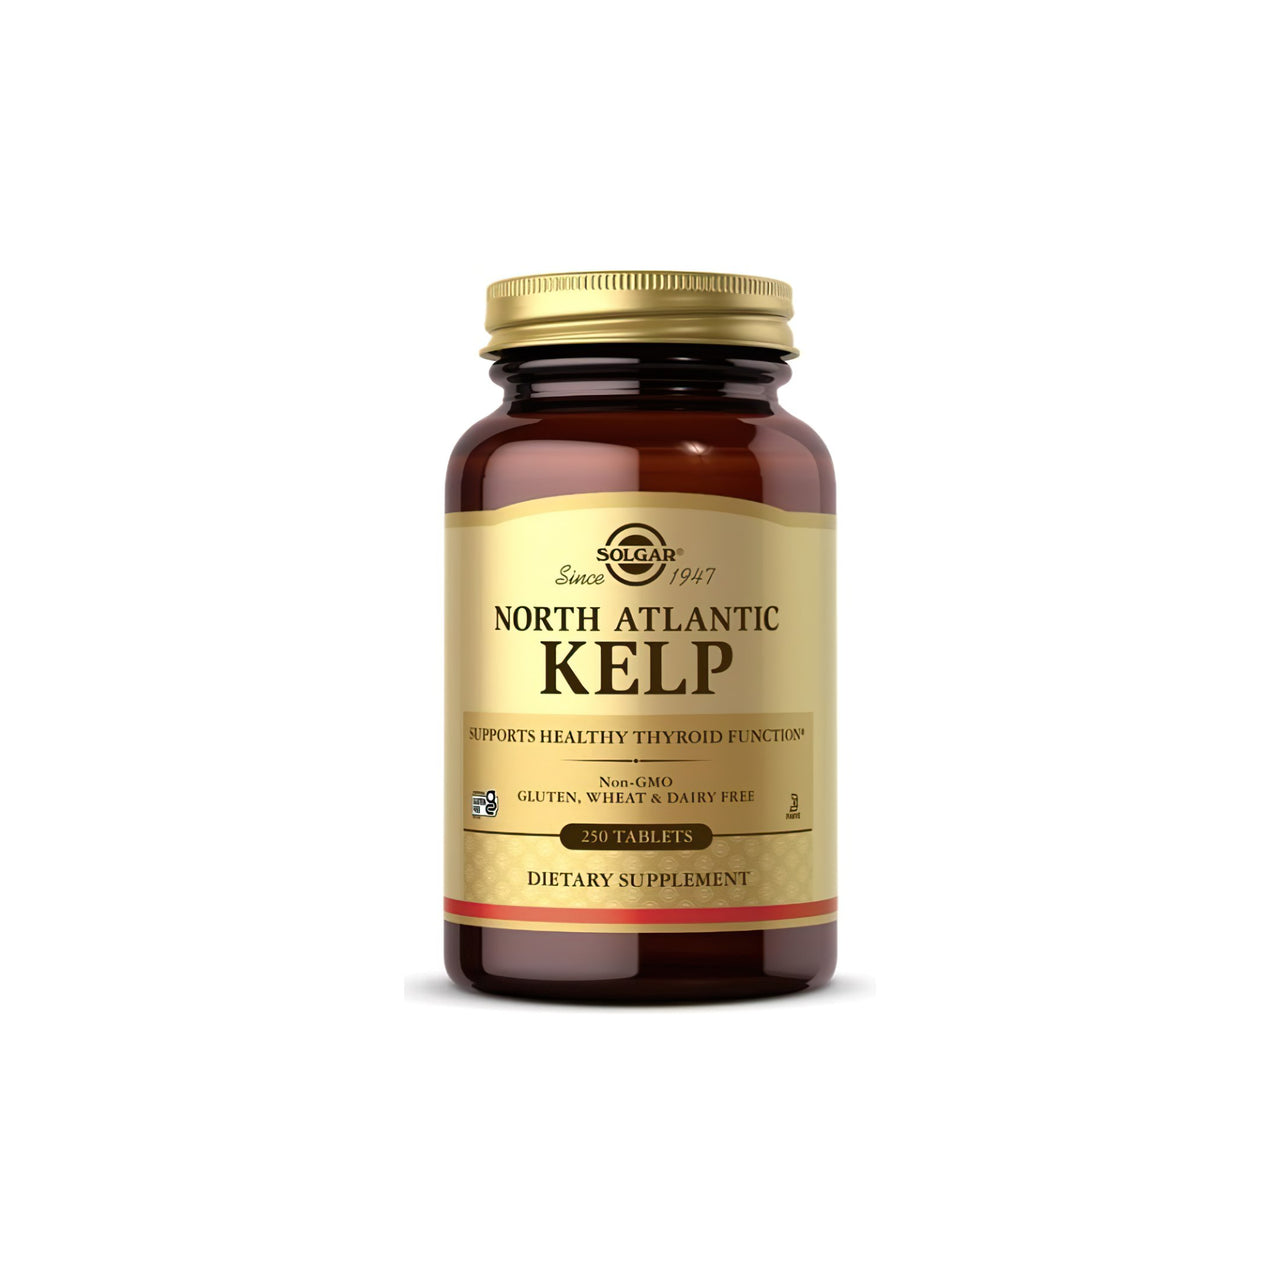 A bottle of Solgar North Atlantic Kelp 200 mcg 250 Tablets, rich in iodine for optimal thyroid gland function.